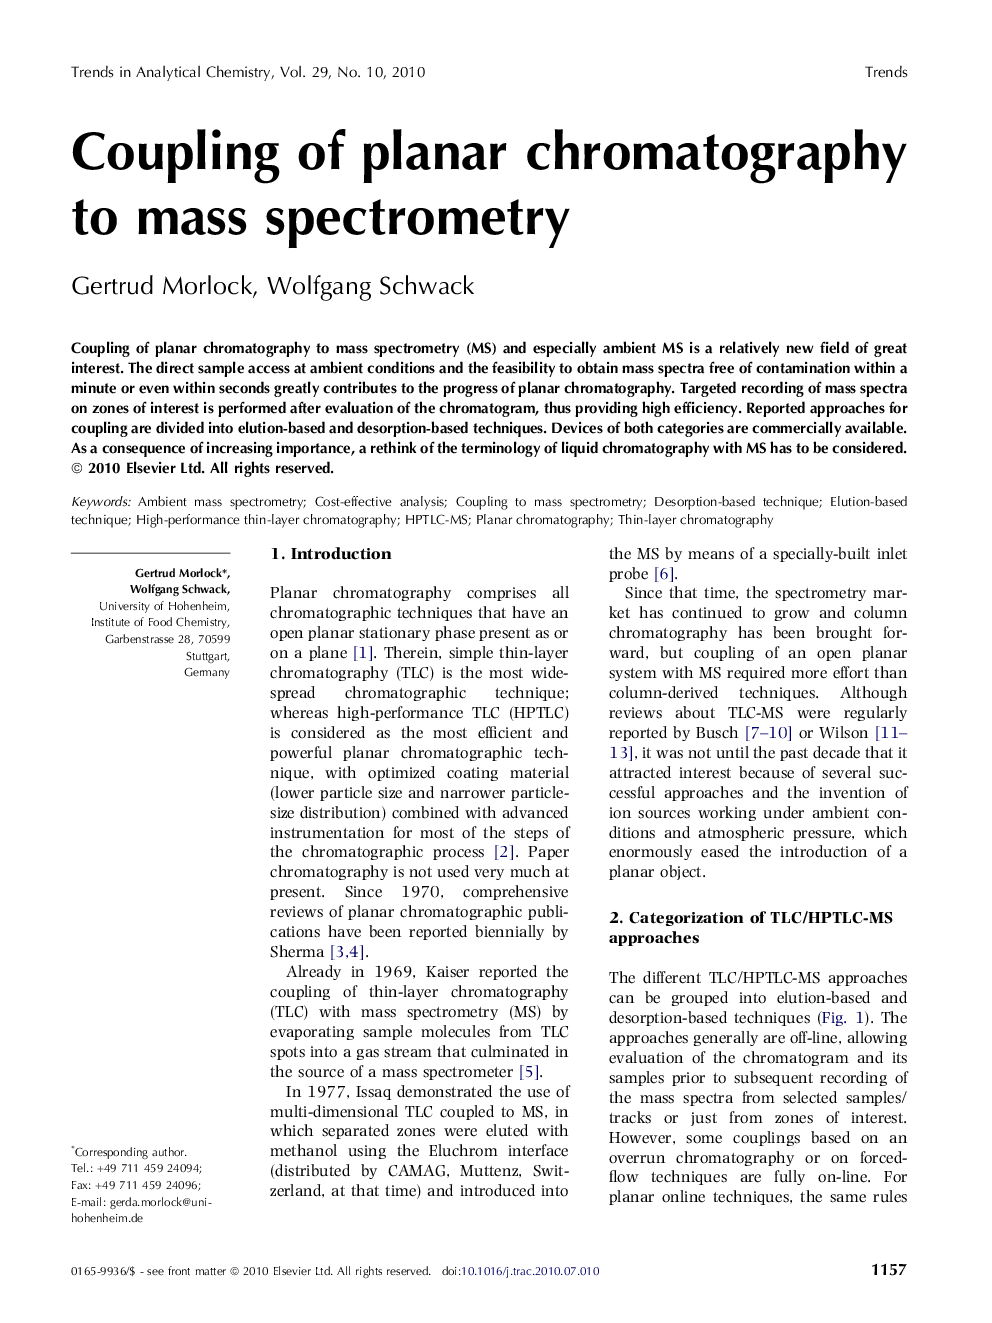 Coupling of planar chromatography to mass spectrometry